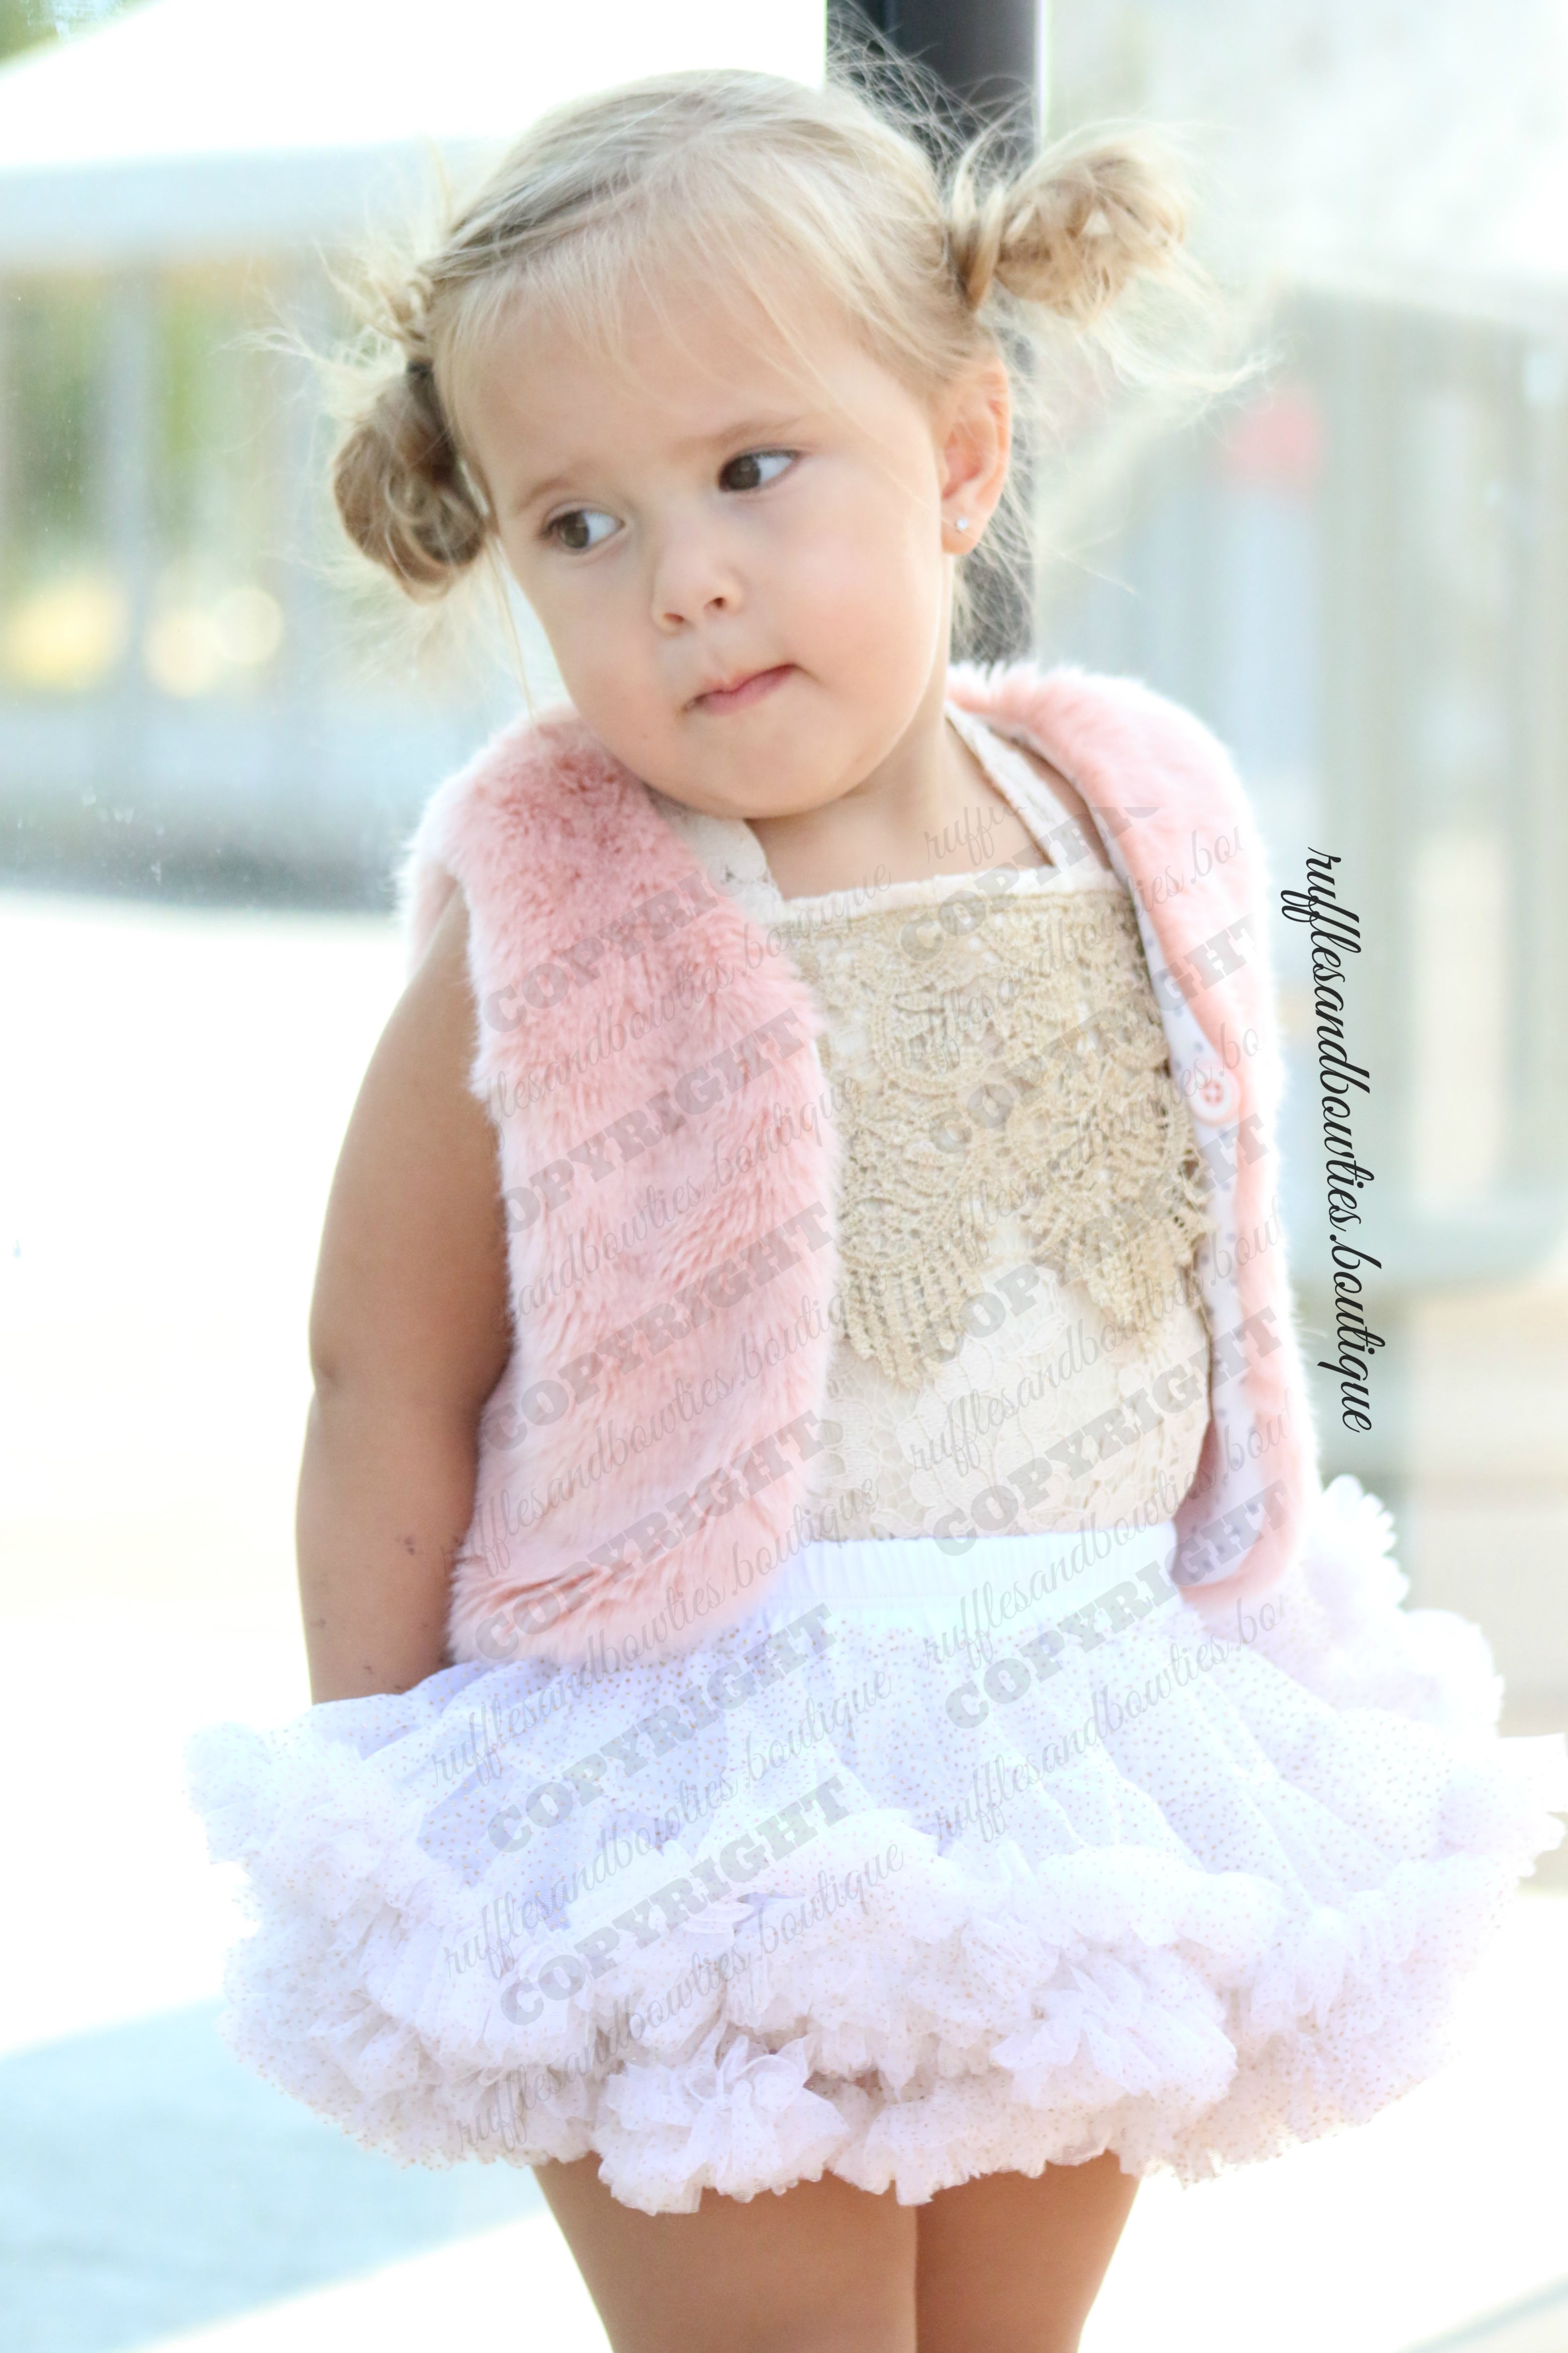 Premium Photo | Chic Indian Baby Girl with Expressive Eyes and Charming  Smile in Modern Dress Creating a Portrait